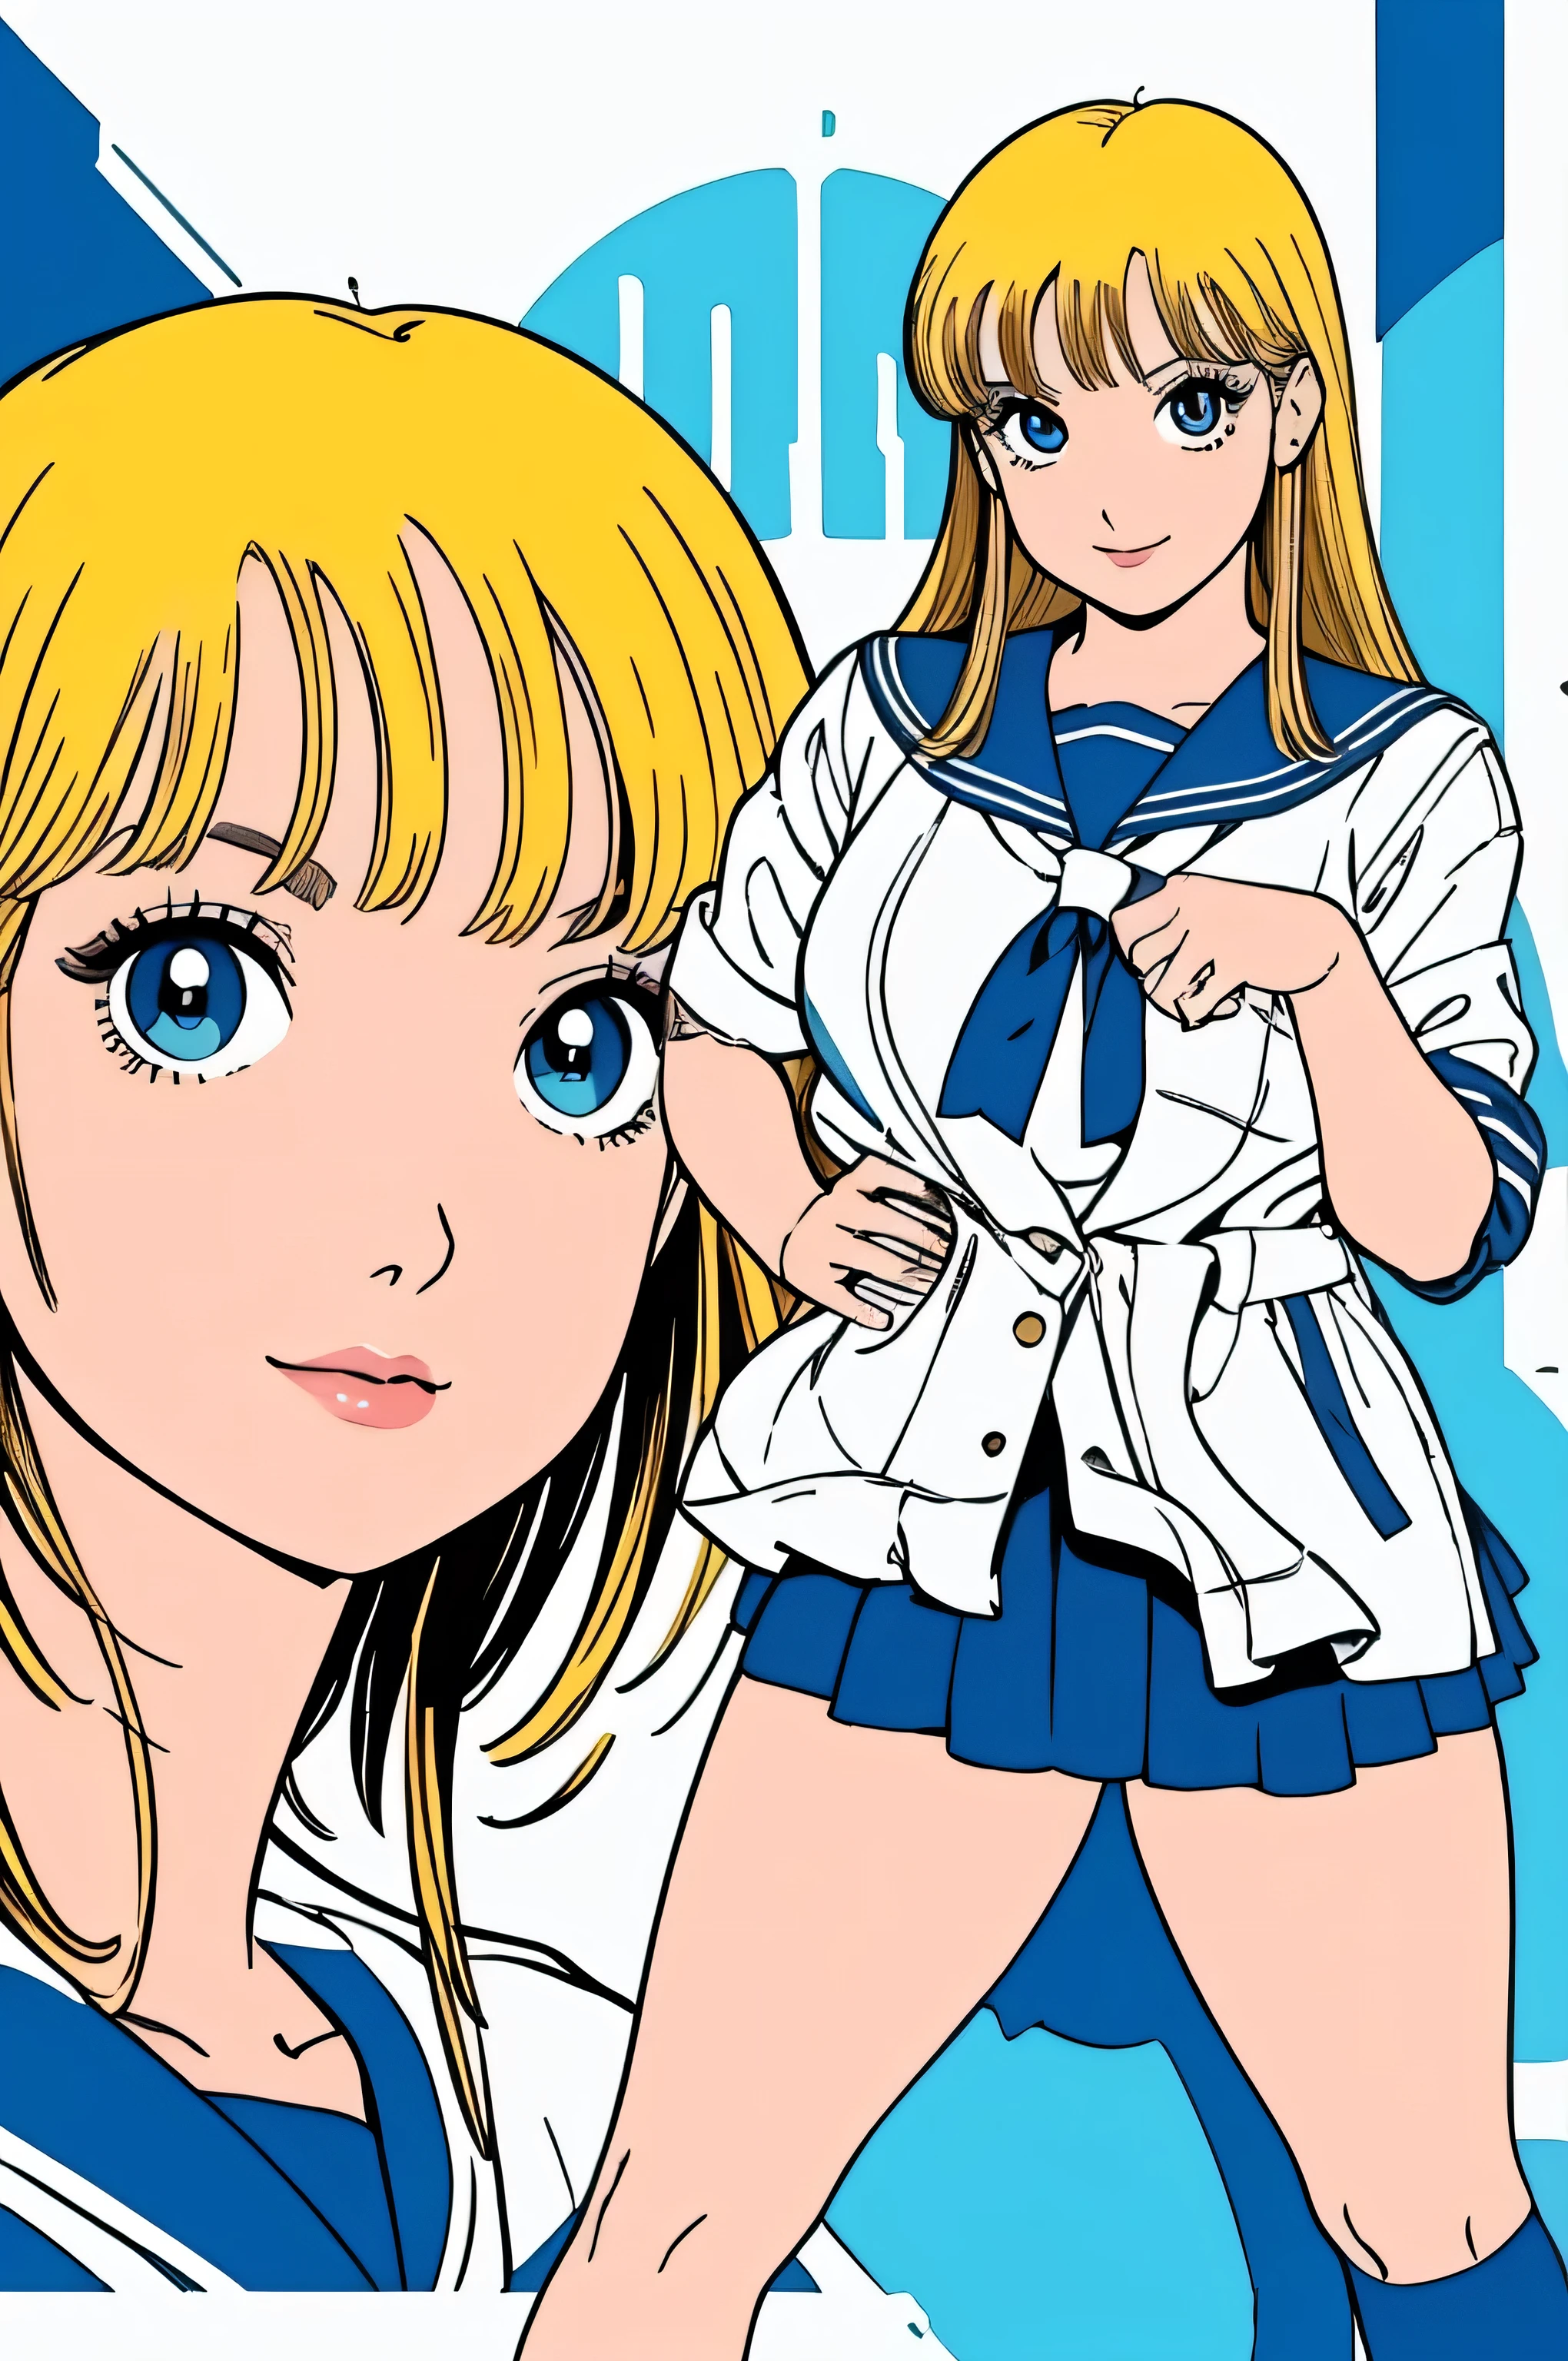 (Masterpiece Anime, Retro art style, Clean brush strokes, Very detailed, Perfect Anatomy, Browsing Caution), City Background, (Above the knee shot), (hibarikun), １Girl, Eyebrows visible through hair, bangs, Blonde Hair, Blue eyes, (Sansakumaru:1.4), (Beautiful and realistic eyes:1.5), Confident々Smile, High Body, Long and beautiful legs, (Mid-chest:1.7), (Cute pose), (Sailor suit top), (Sailor suit miniskirt, Navy blue), Leather student bag,